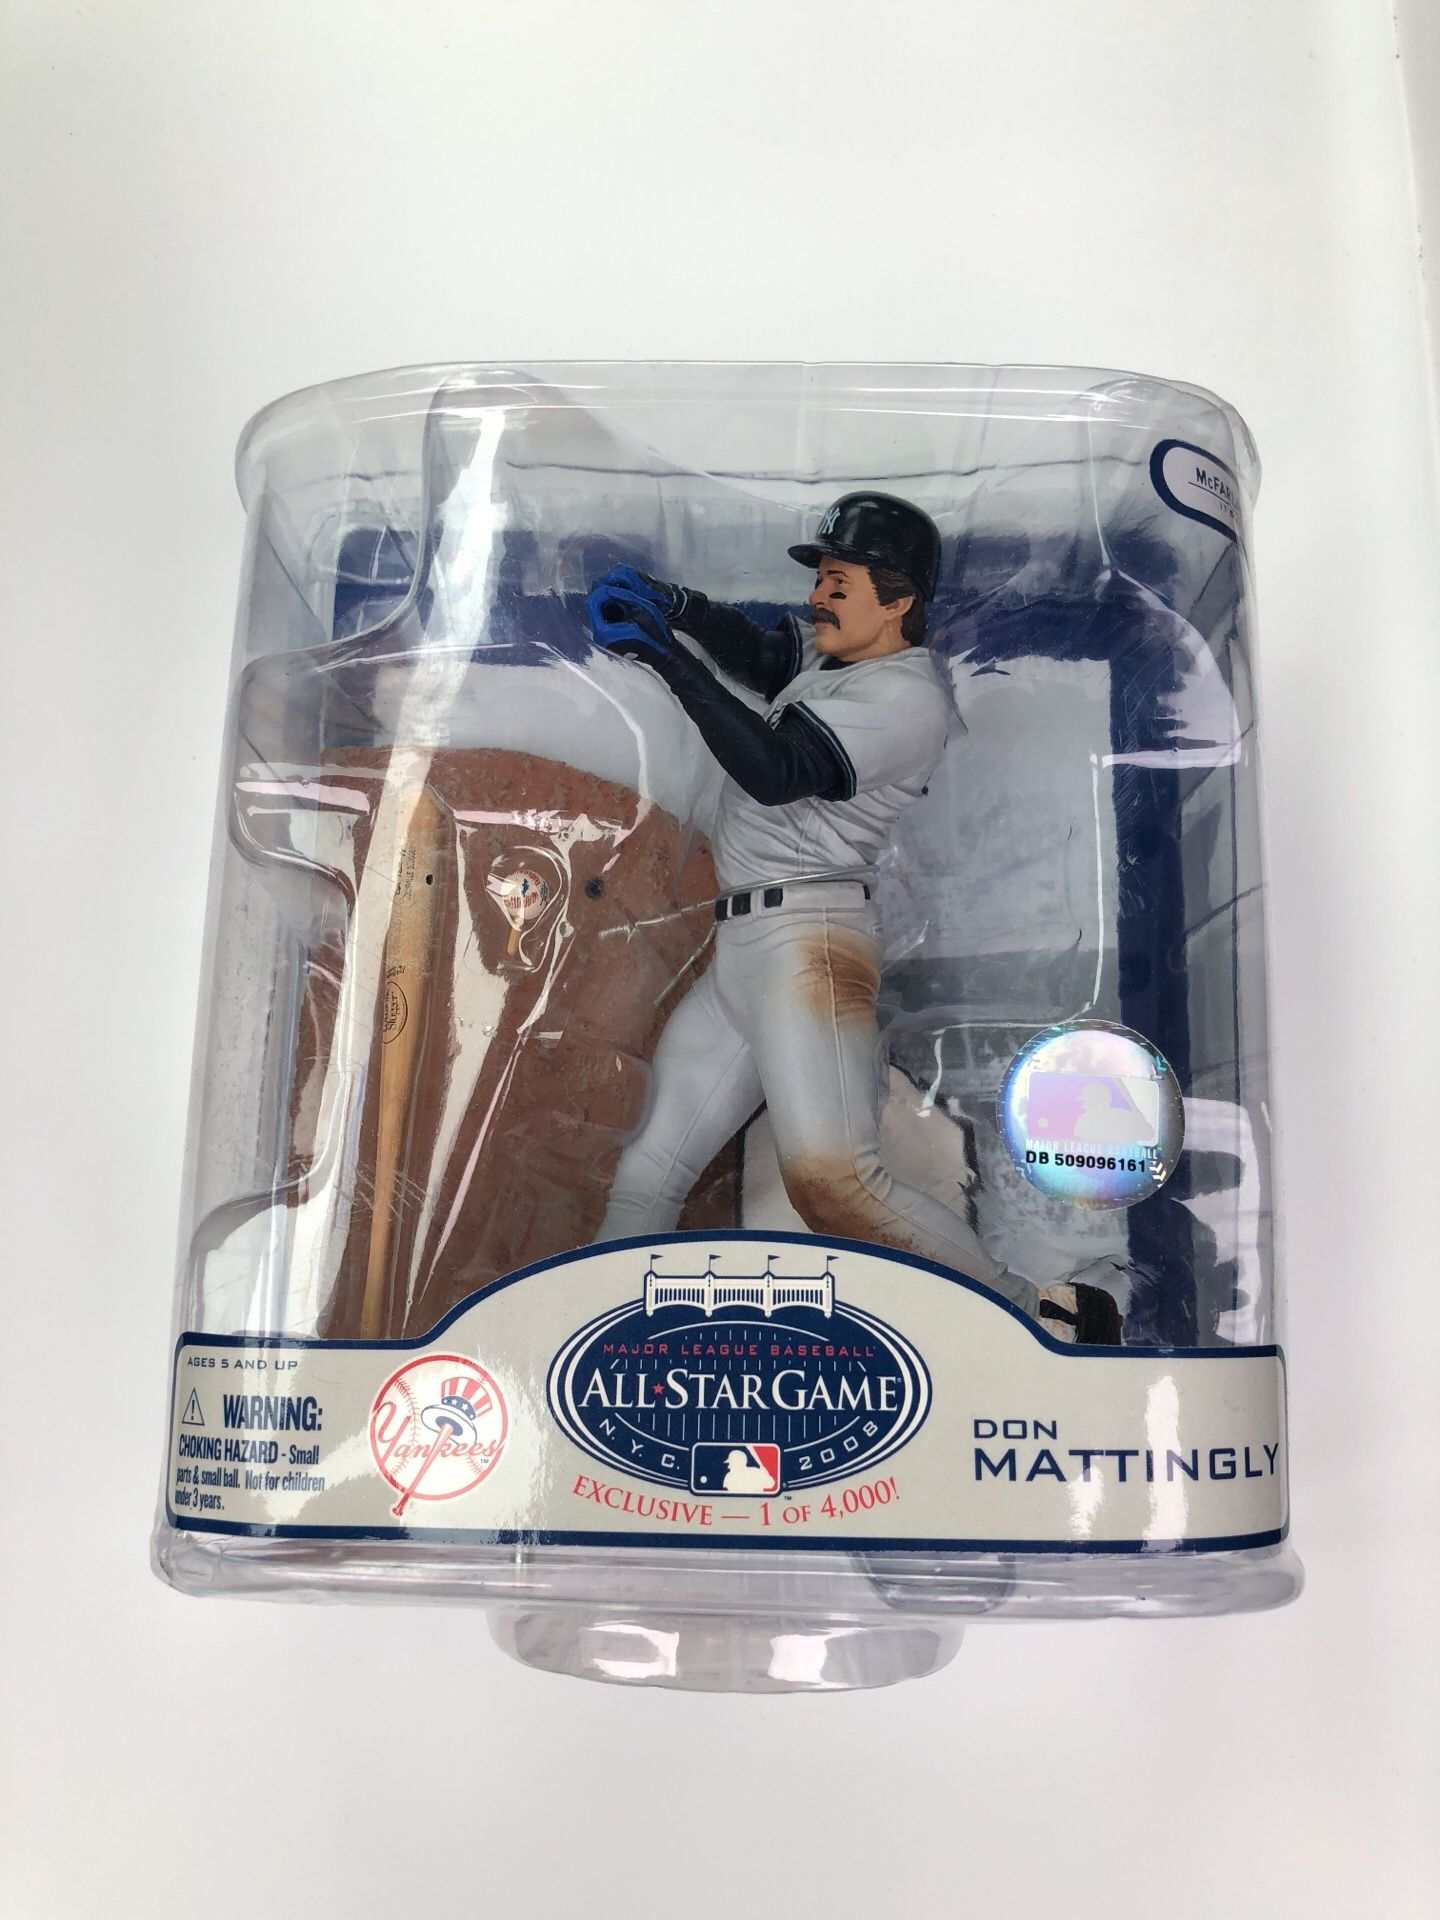 Don Mattingly 2008 NY Yankee All StarGame Exclusive McFarlane Figure (1 of only 4,000)